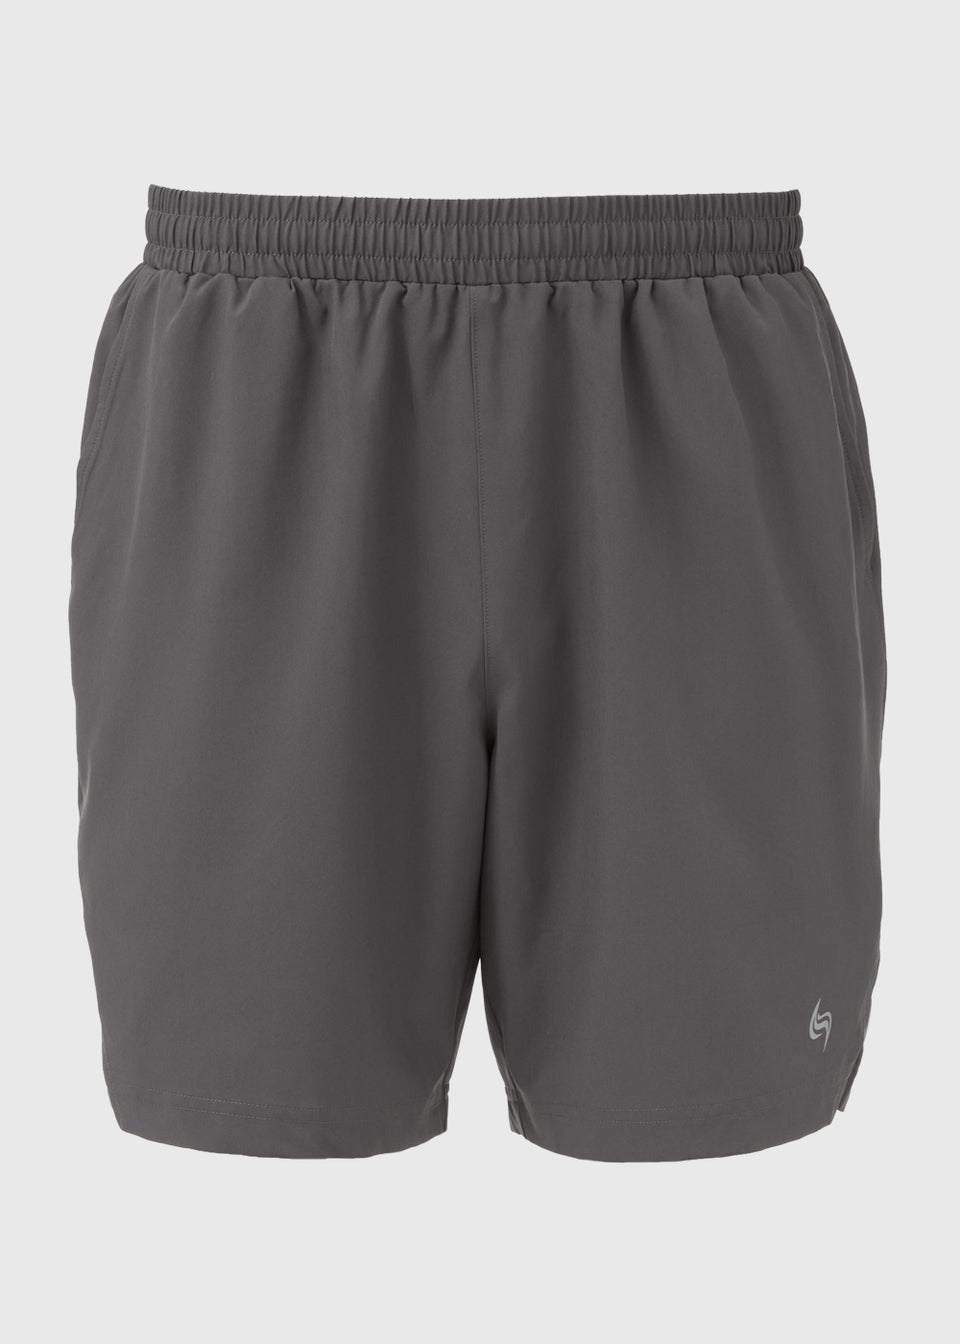 Souluxe Charcoal Shorts